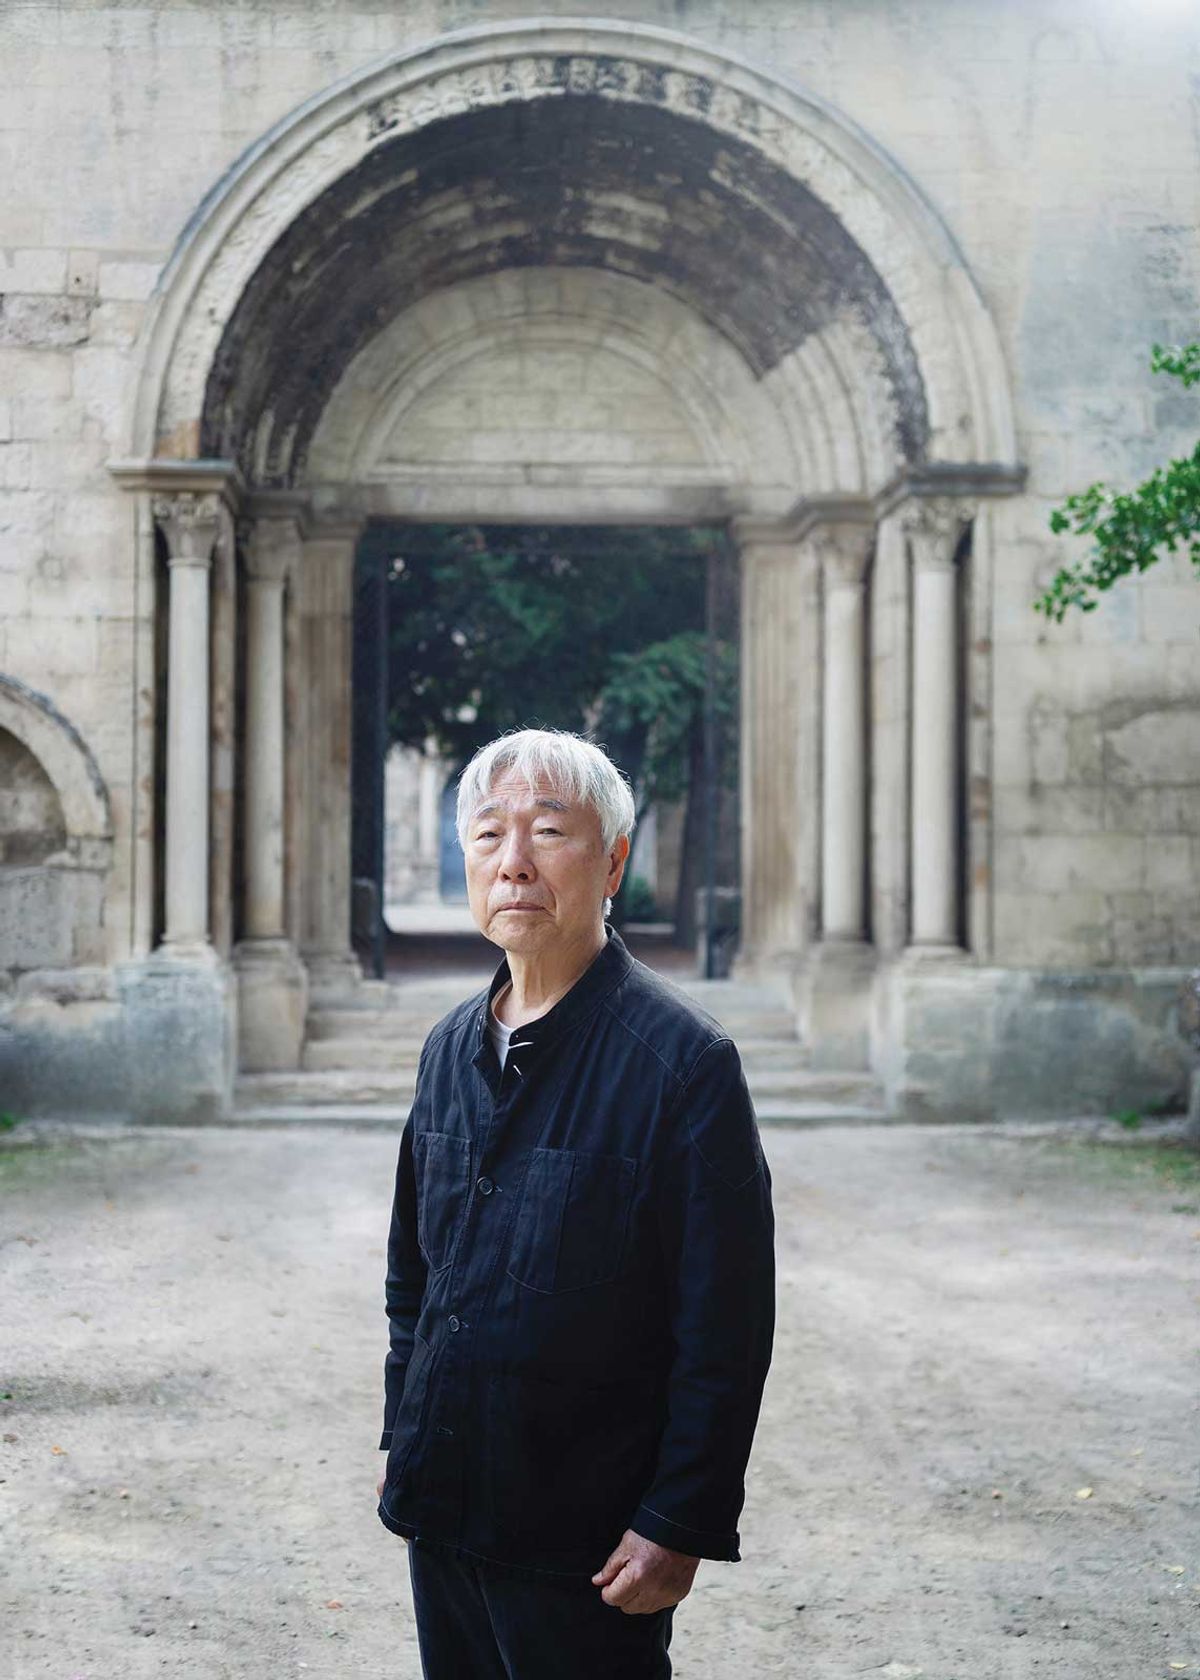 Ufan says his Arles institution will not be a “mausoleum” but a “living place” for visitors to discover new artworks

Photo: Claire Dorn. Courtesy Studio Lee Ufan